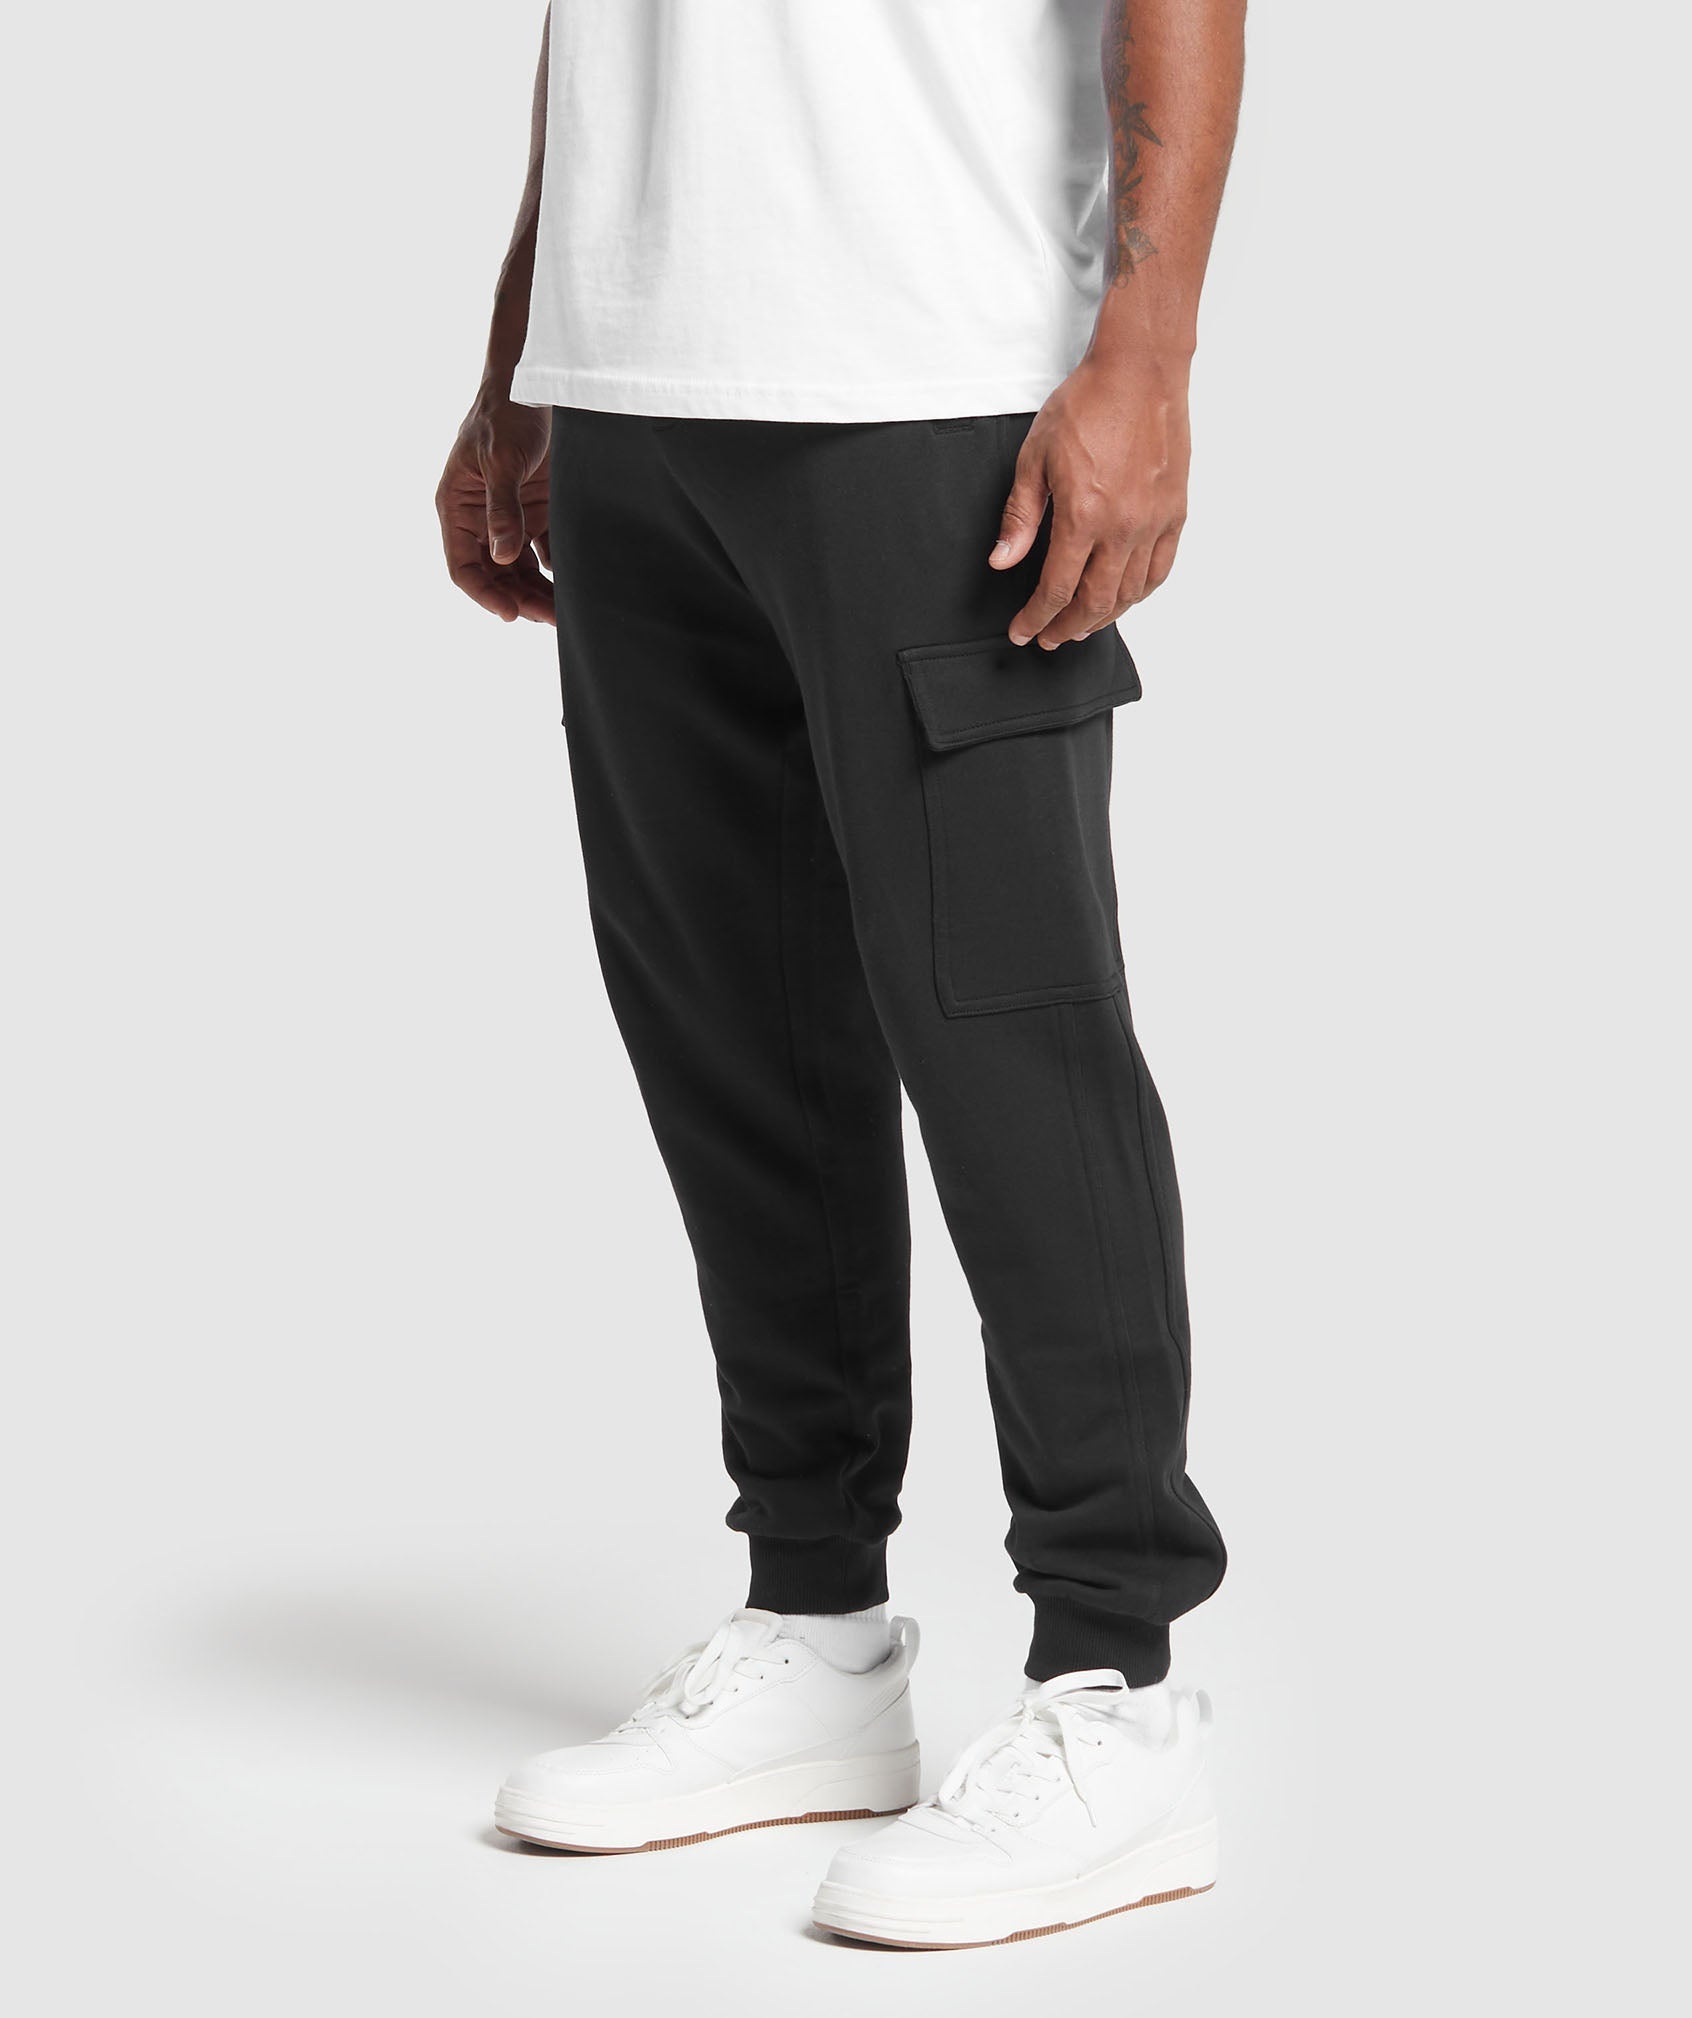 Rest Day Essentials Cargo Joggers in Black - view 3